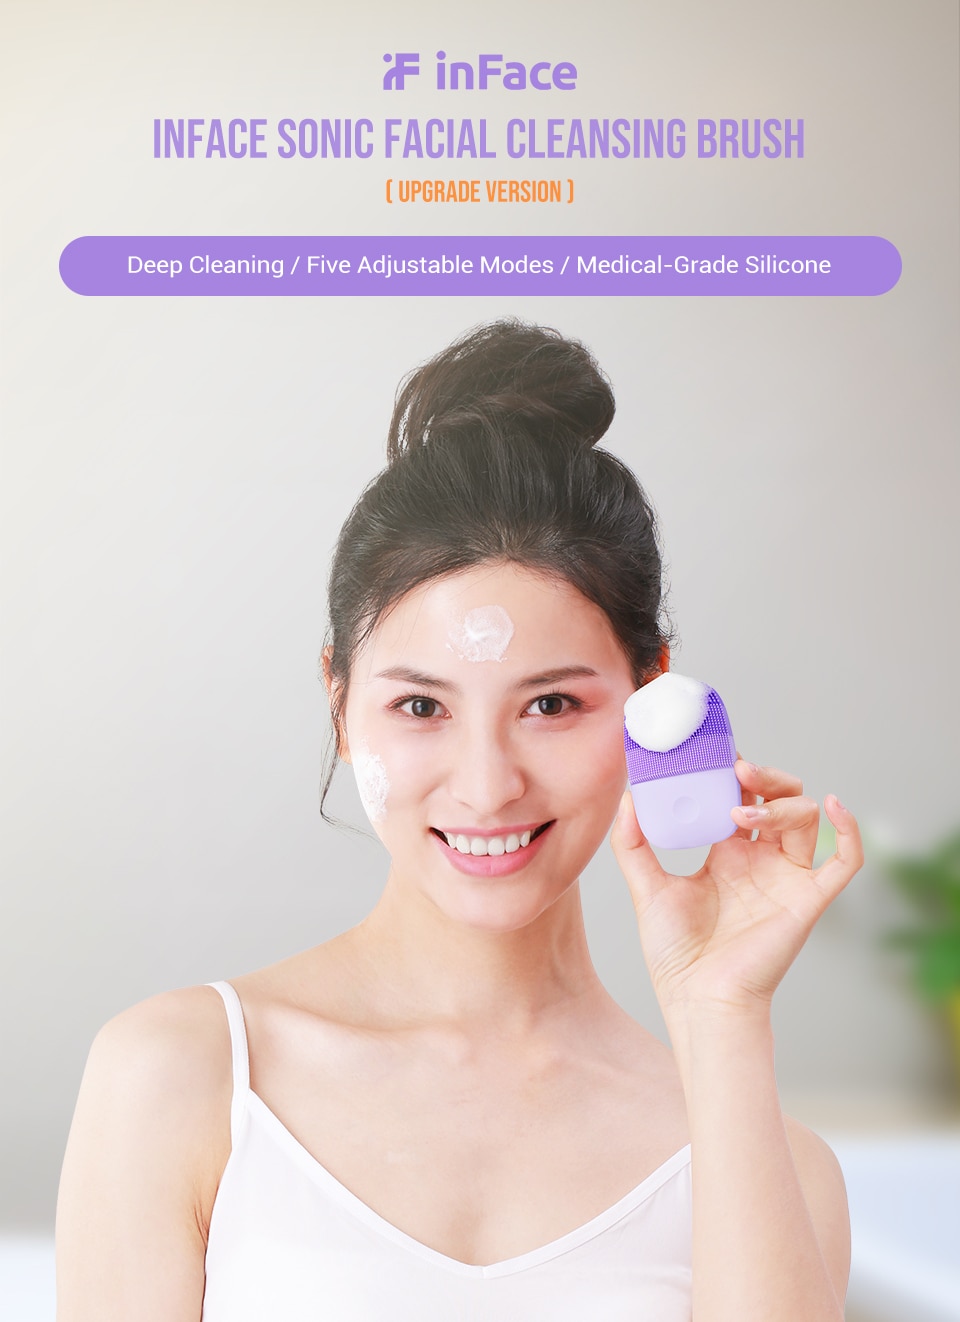 Electric facial cleanser